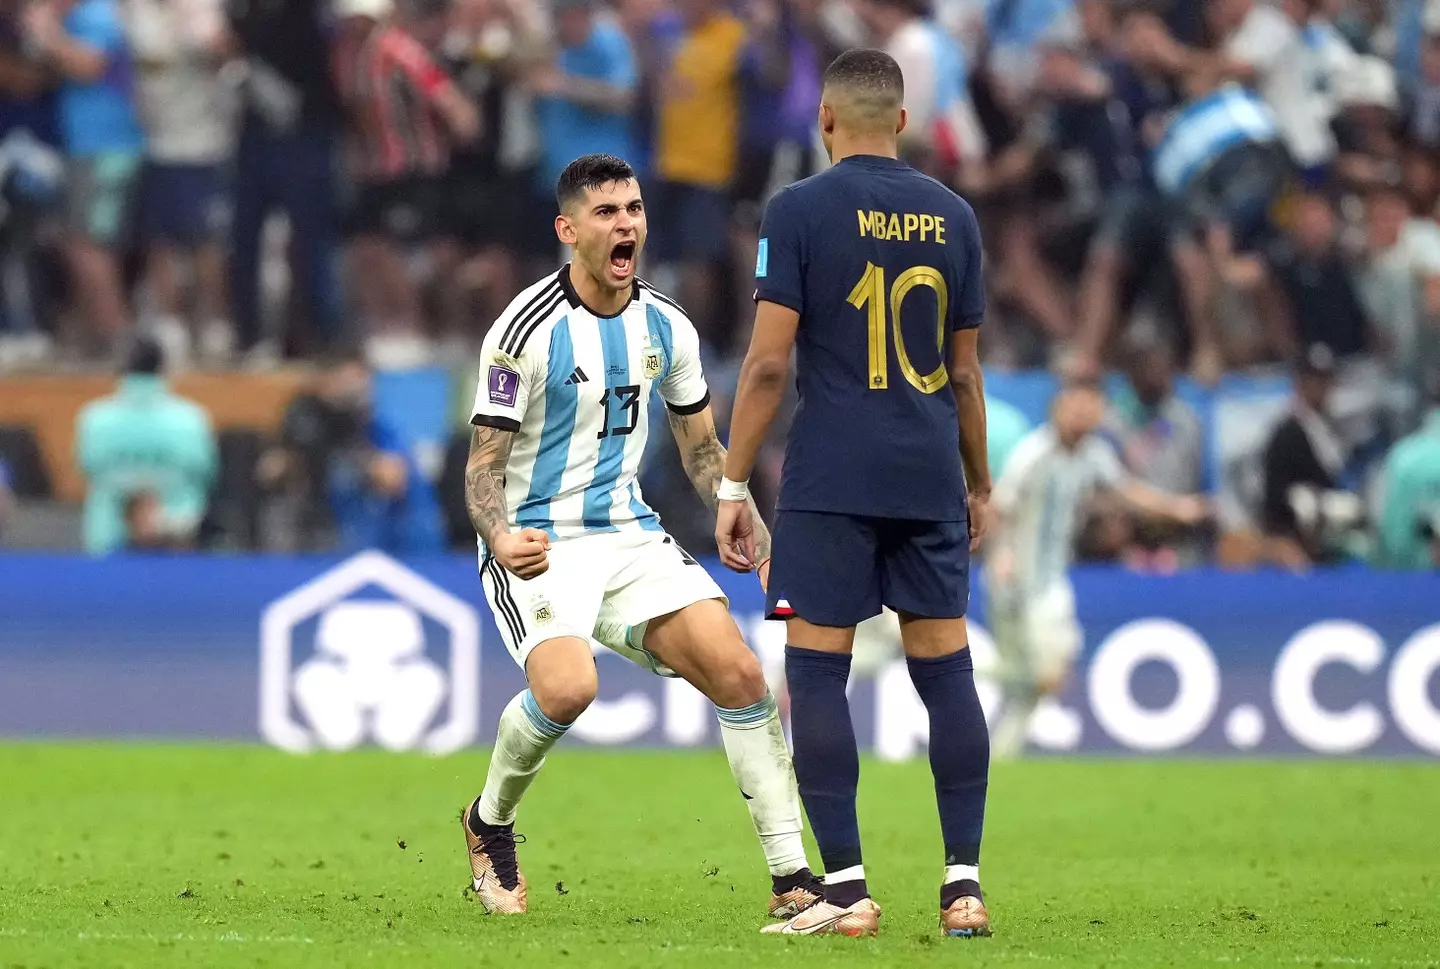 Argentina defender Cristian Romero screamed in the face of France forward Kylian Mbappe in the World Cup final.